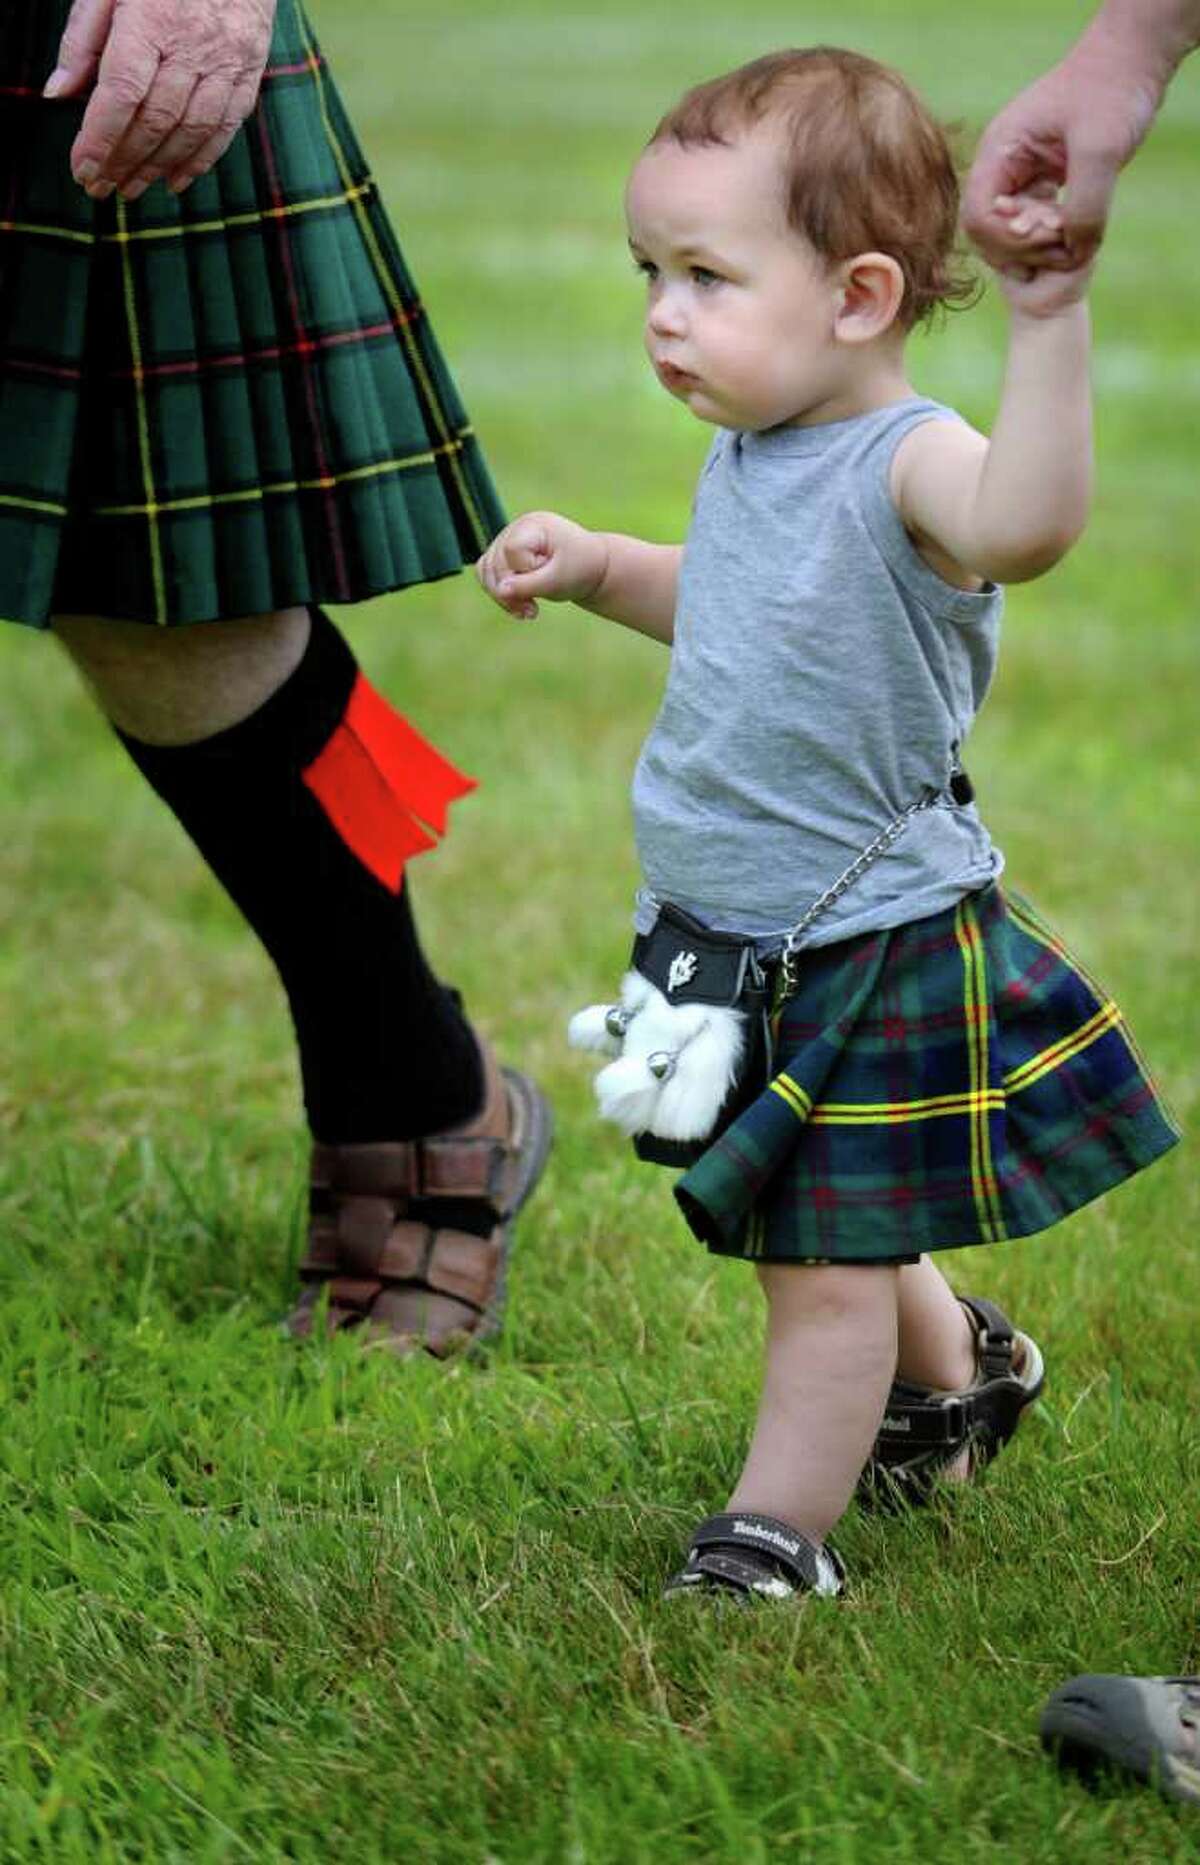 One-year-old Liam Mattice, of Trumbull, marches onto center field with clan Malcolm during opening ceremonies of the 88th Annual Round Hill Highland Games at Cranbury Park in Norwalk, Conn. Saturday, July 2, 2011.